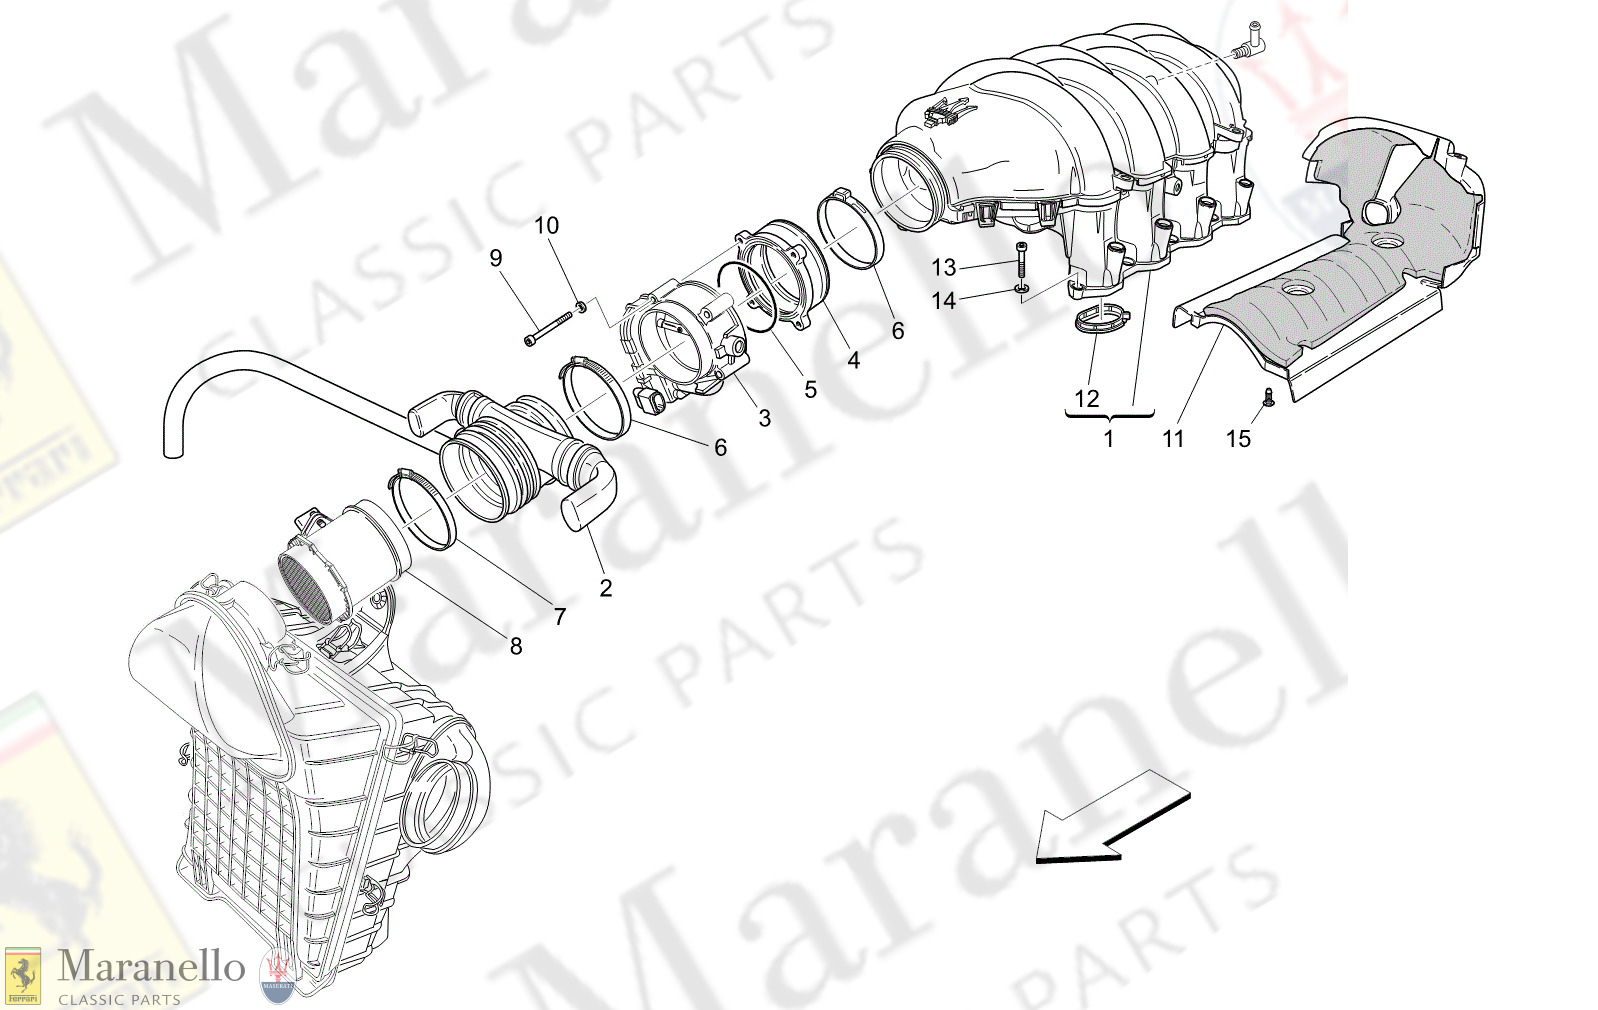 01.40 - 11 - 0140 - 11 Intake Manifold And Throttle Body